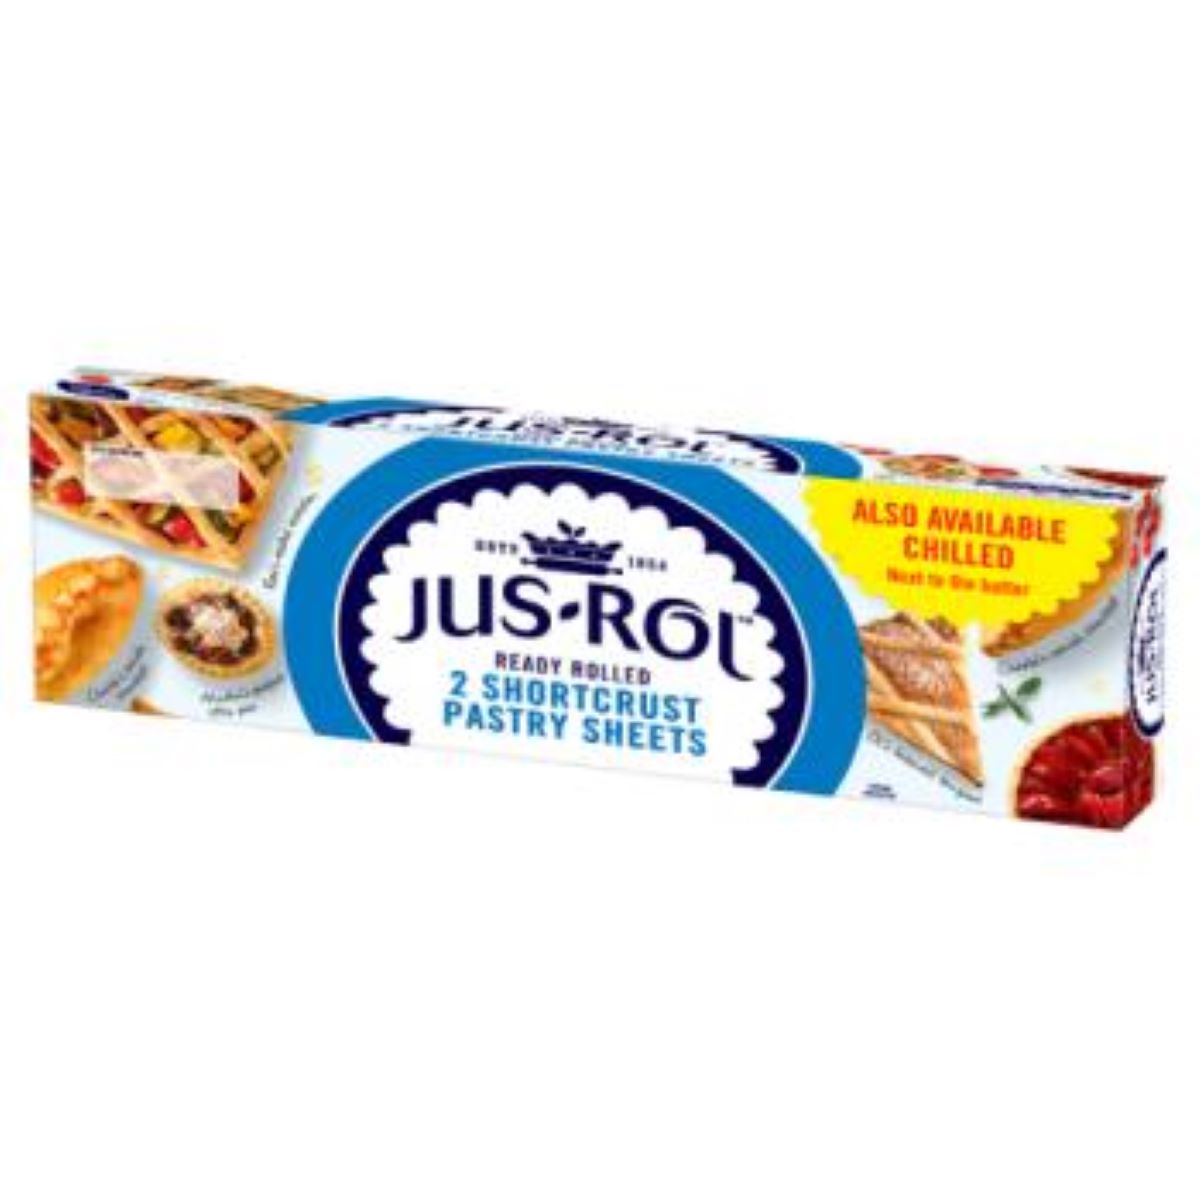 Jus Rol Ready Rolled Shortcrust Pastry Sheets 2 x 320g (640g)